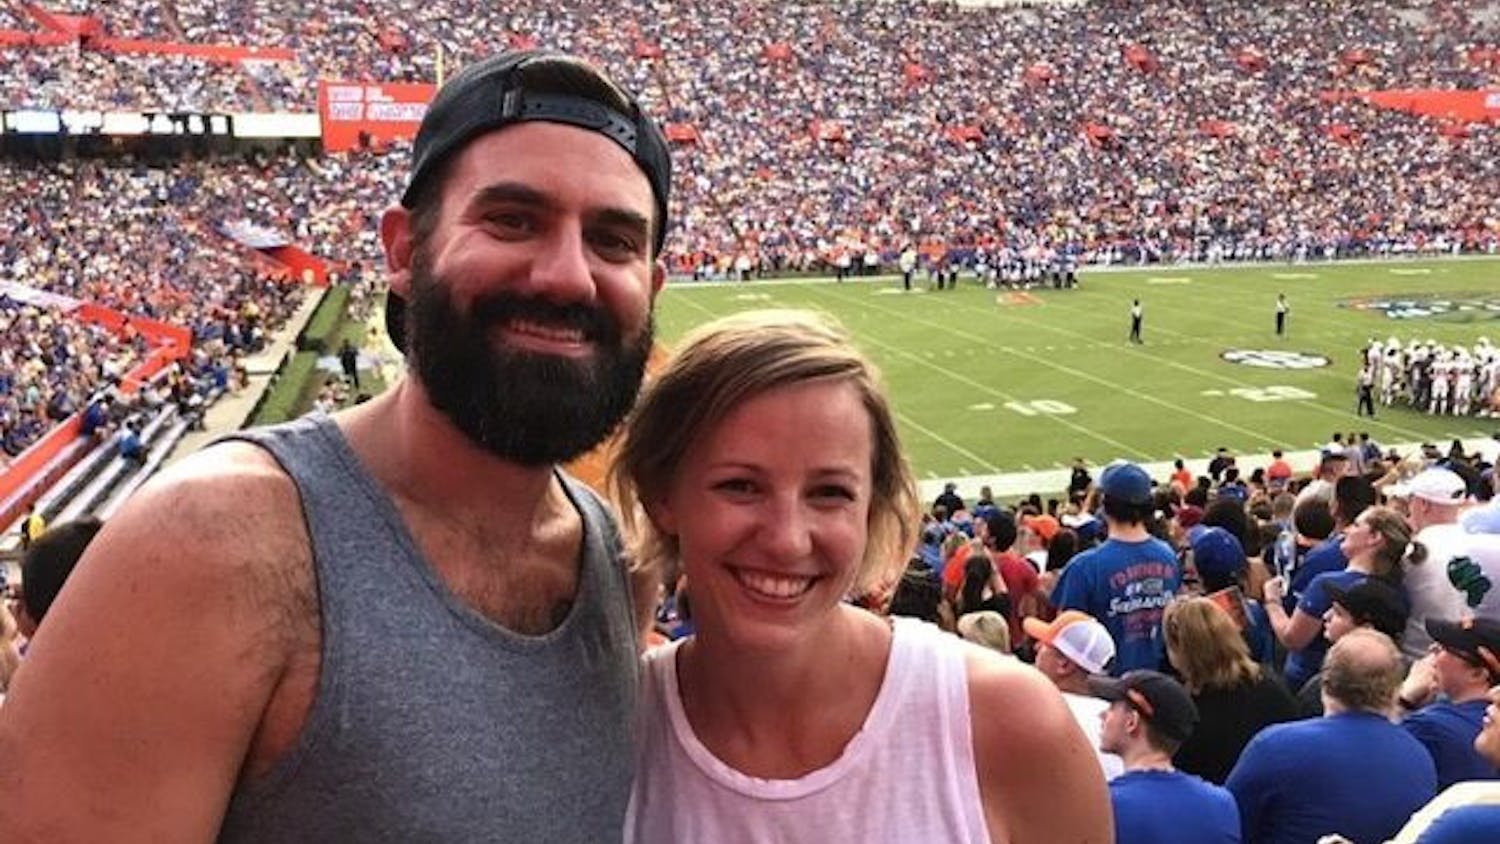 Matthew Baldwin and Stephanie Rüegg at the Gator football game against University of Tennessee-Martin on Sept. 7, 2019. This was Rüegg’s first-ever American football game she attended.&nbsp;
&nbsp;